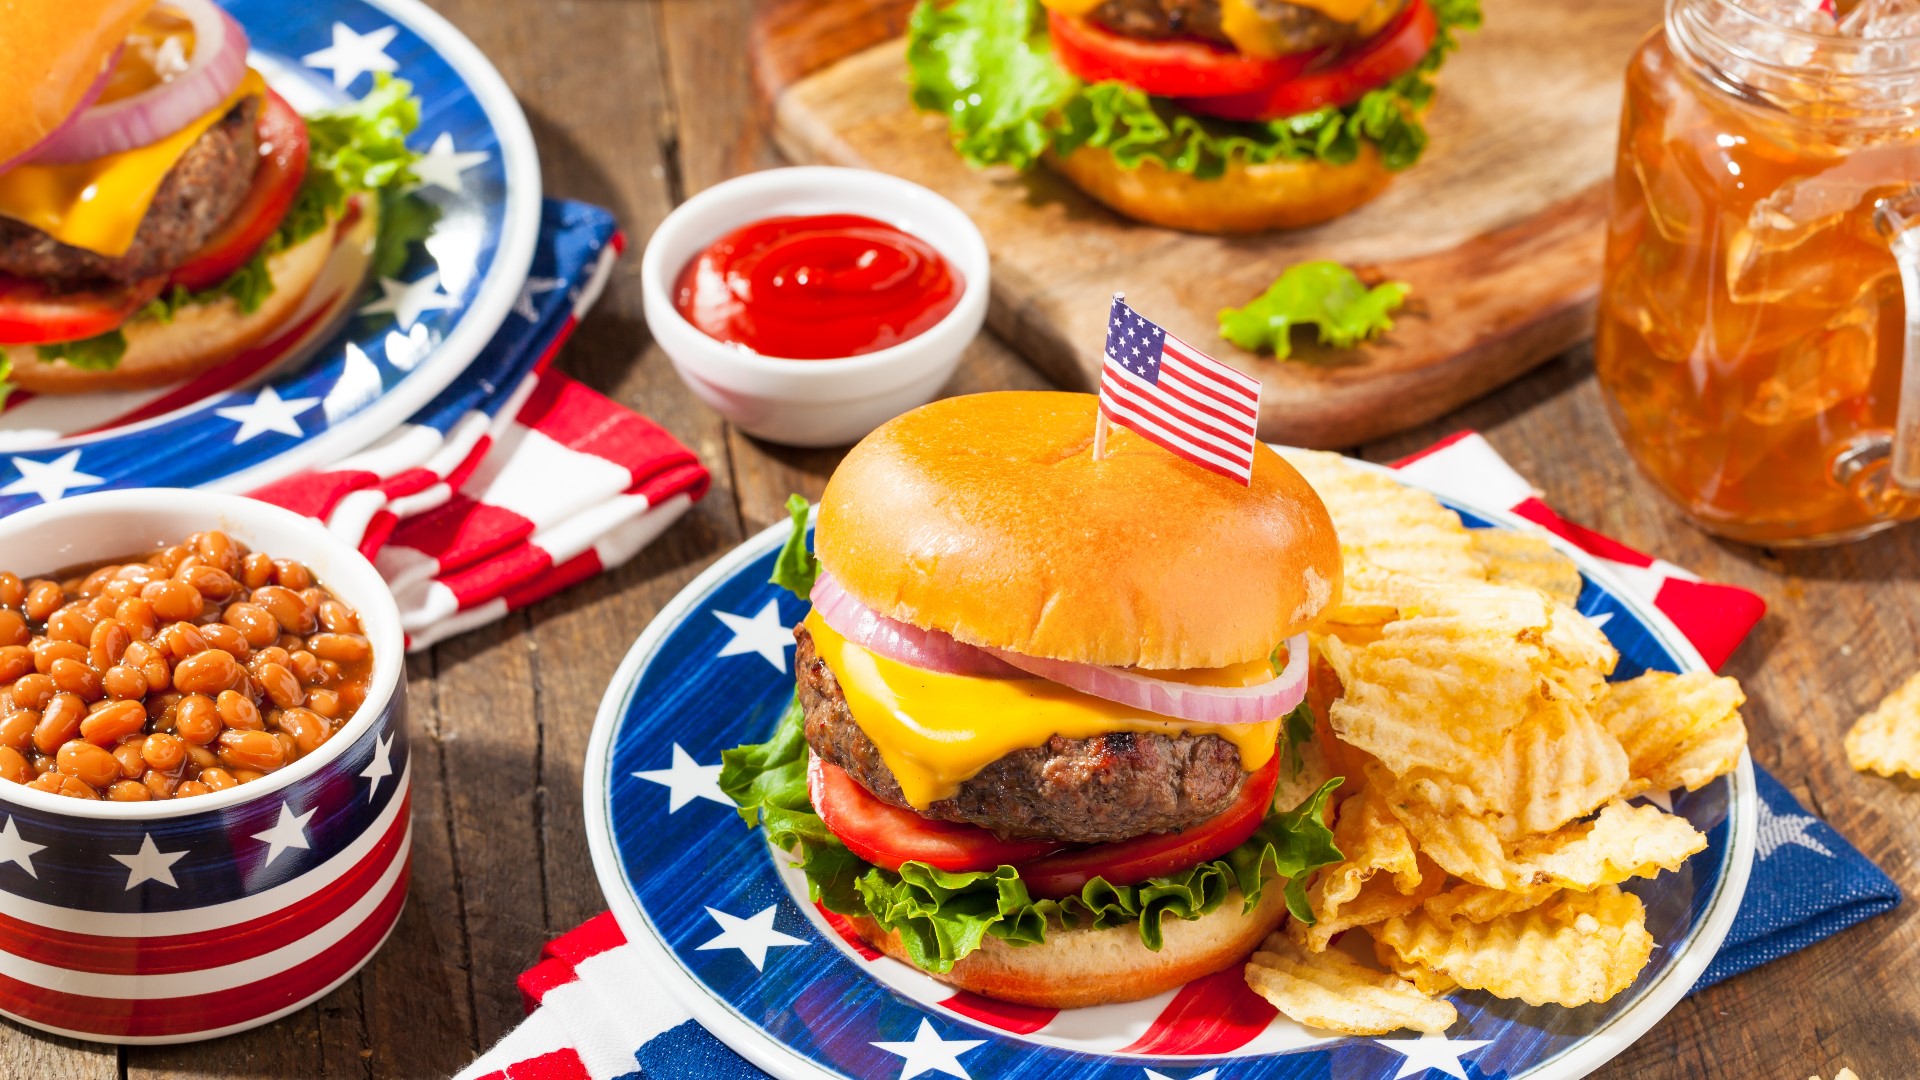 What is your #1 rule for a cookout ahead of the 4th of July weekend?